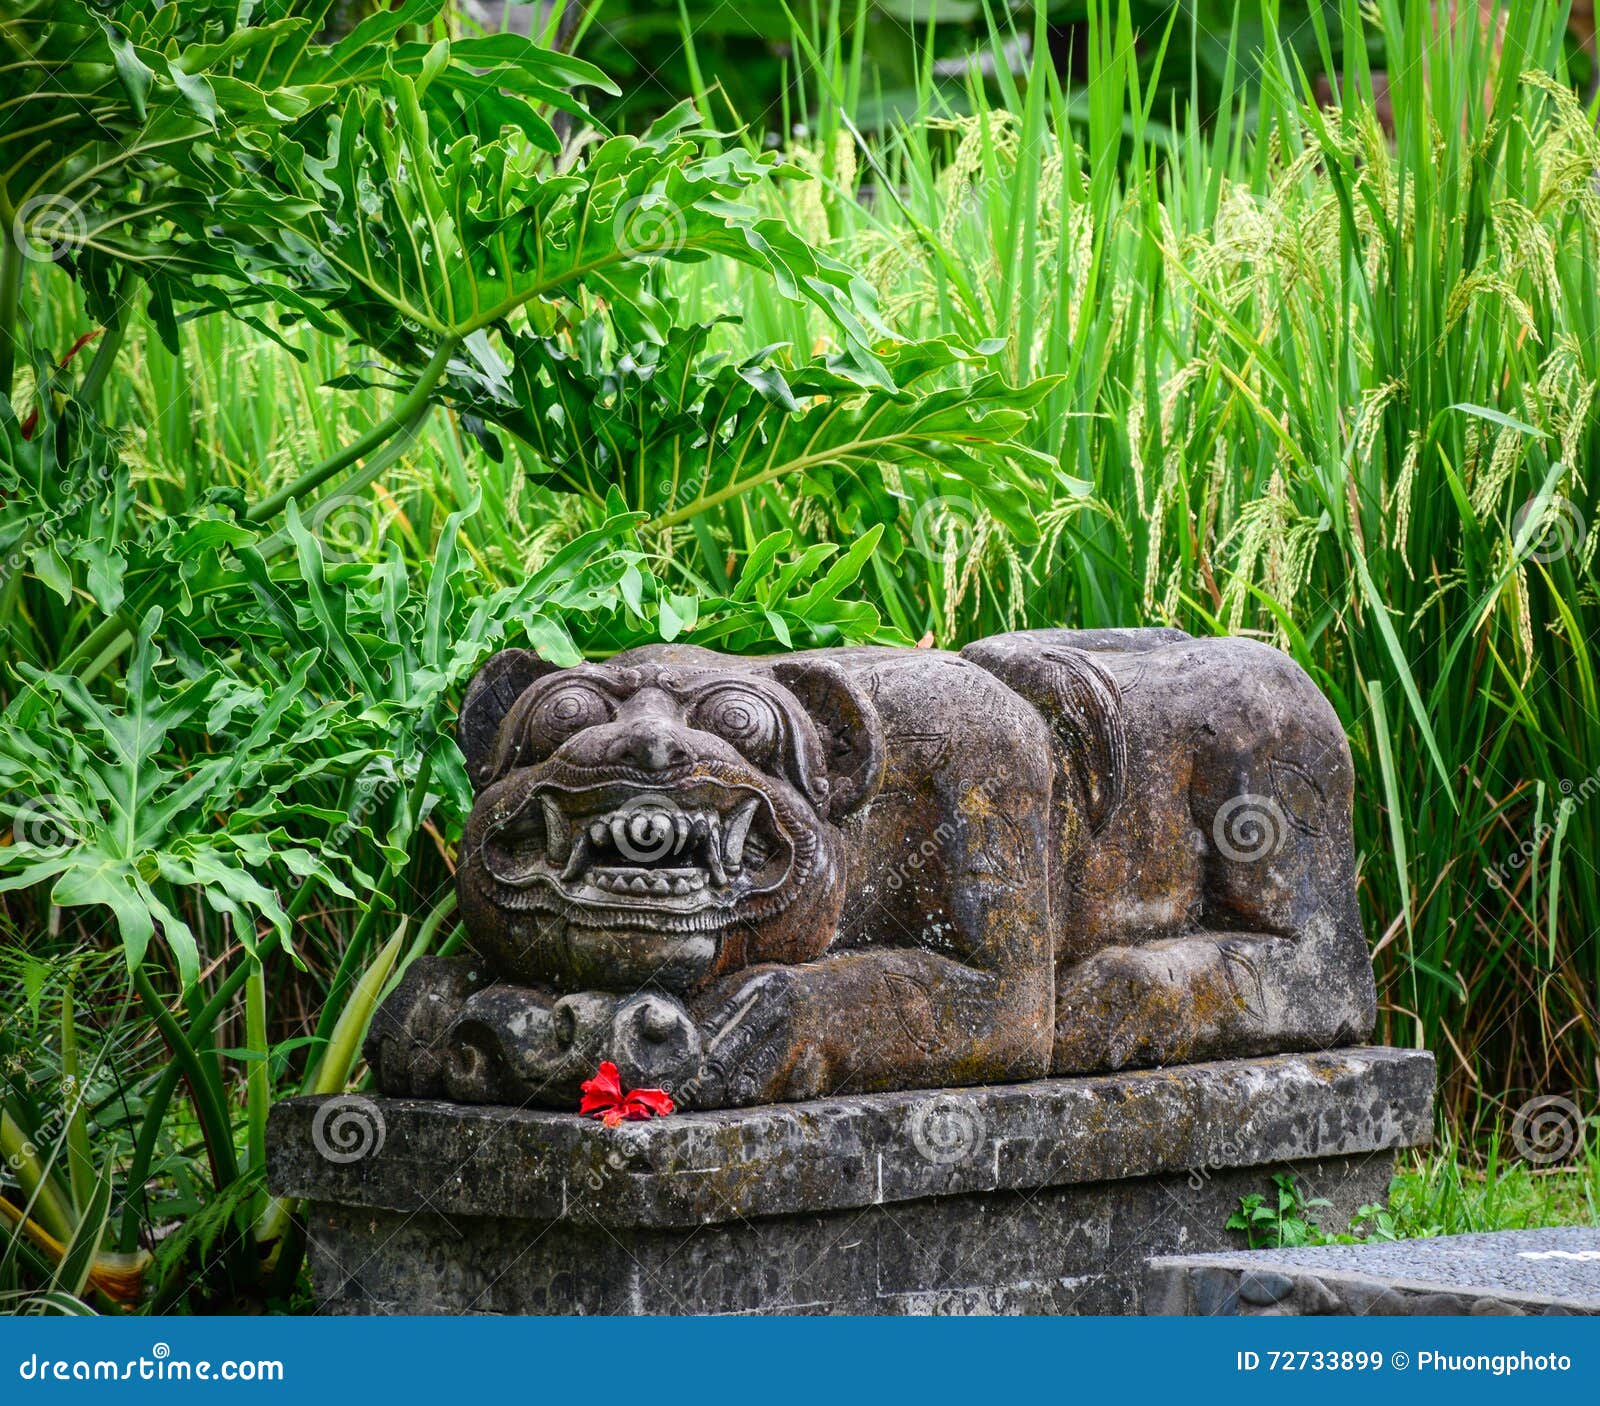 Animal Statue At The Village In Bali, Indonesia Stock Image - Image of coconut, carrying: 72733899